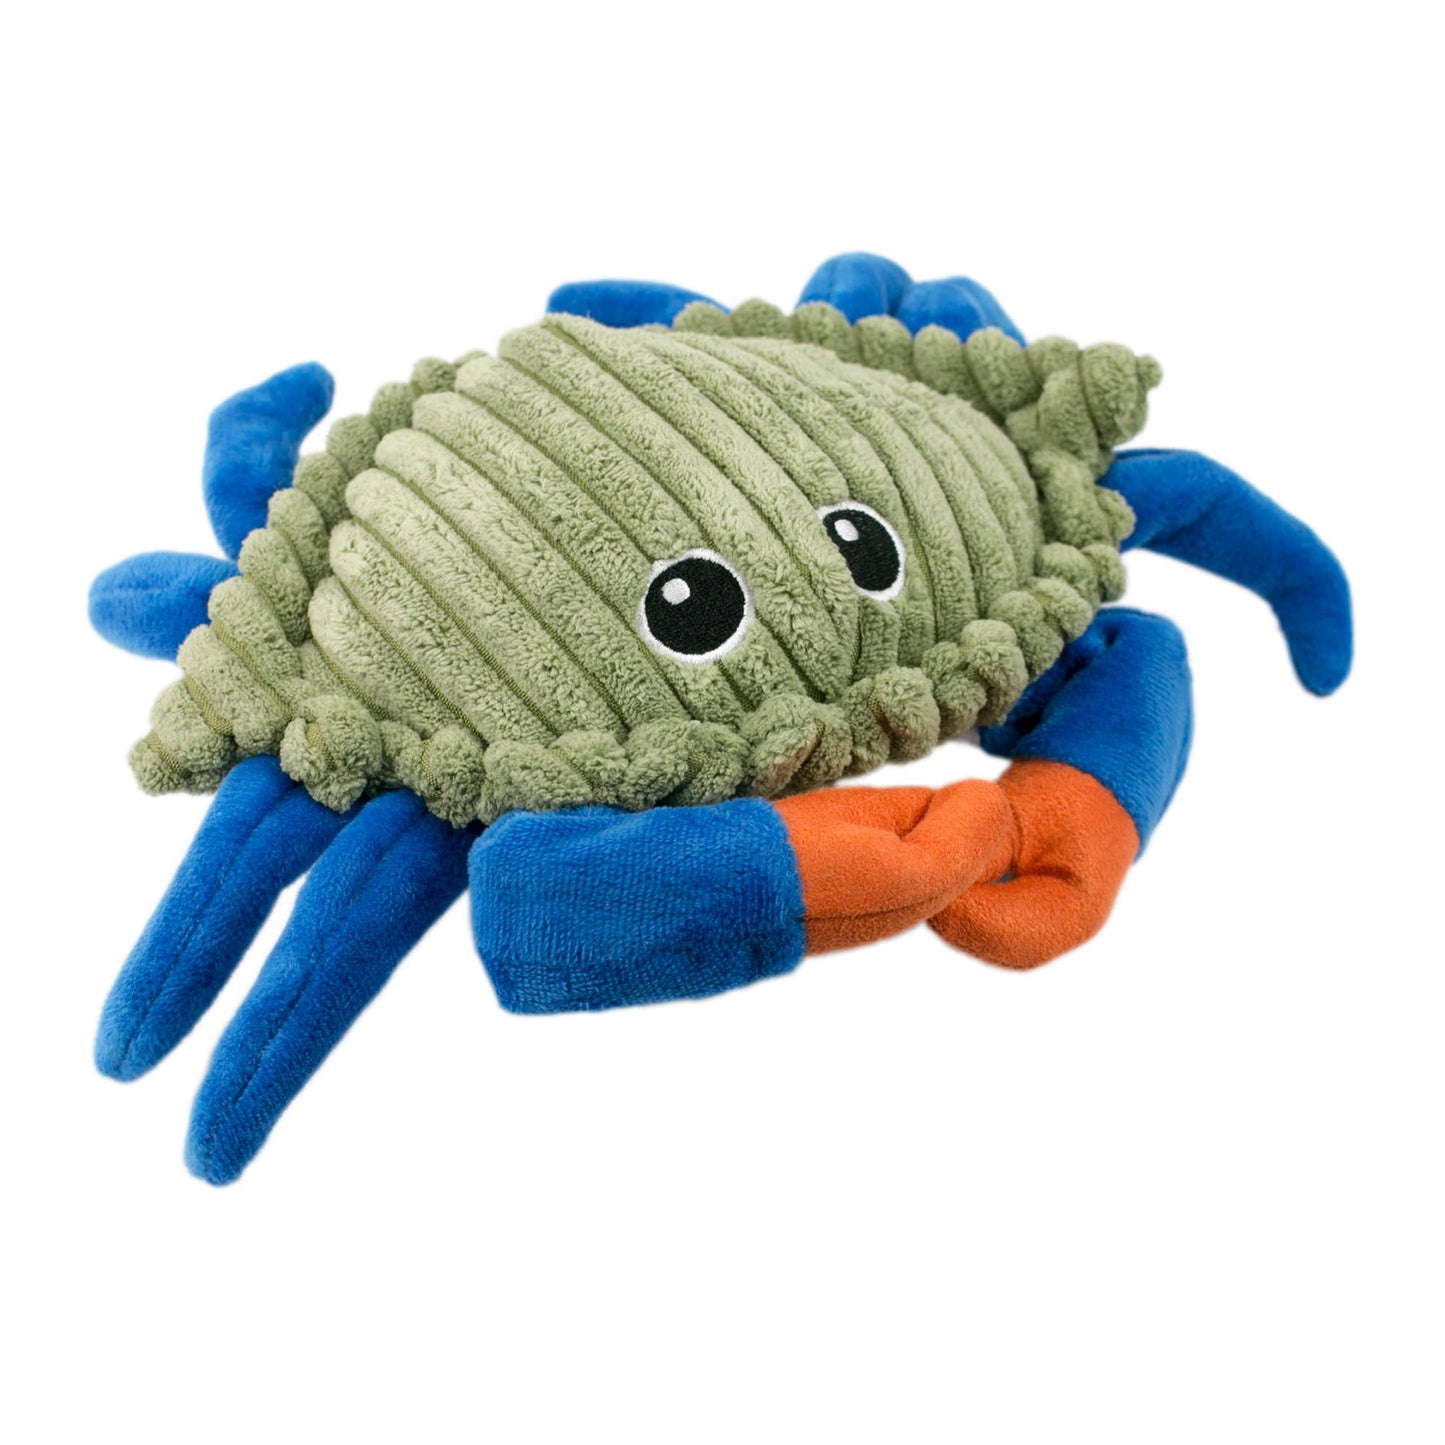 Tall Tails Animated Crab Toy